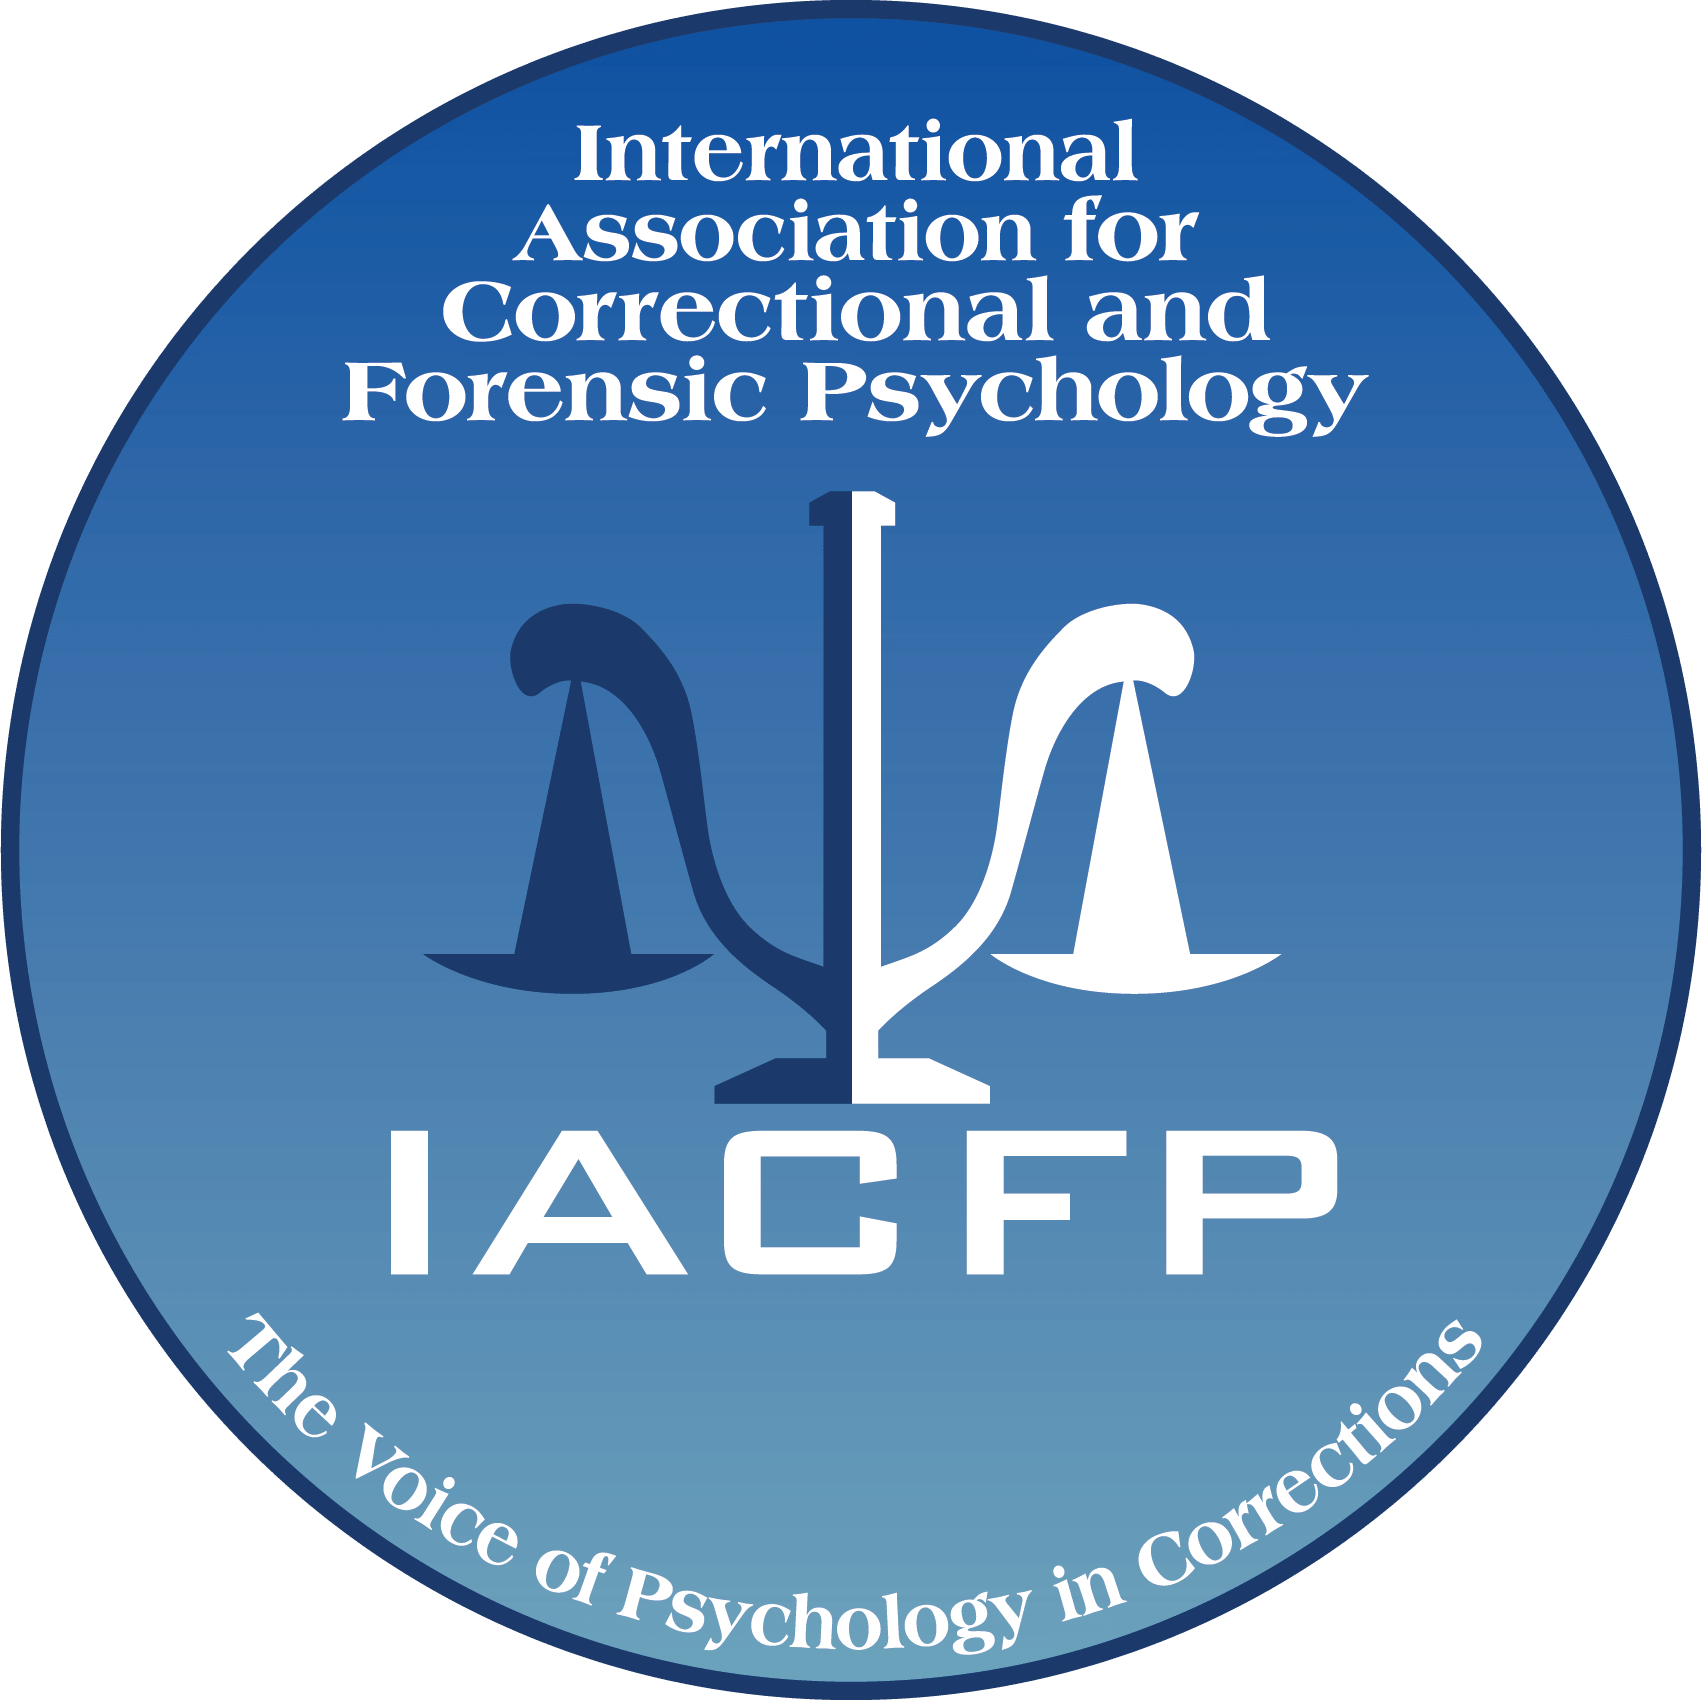 international-association-for-correctional-and-forensic-psychology-global-justice-resource-center